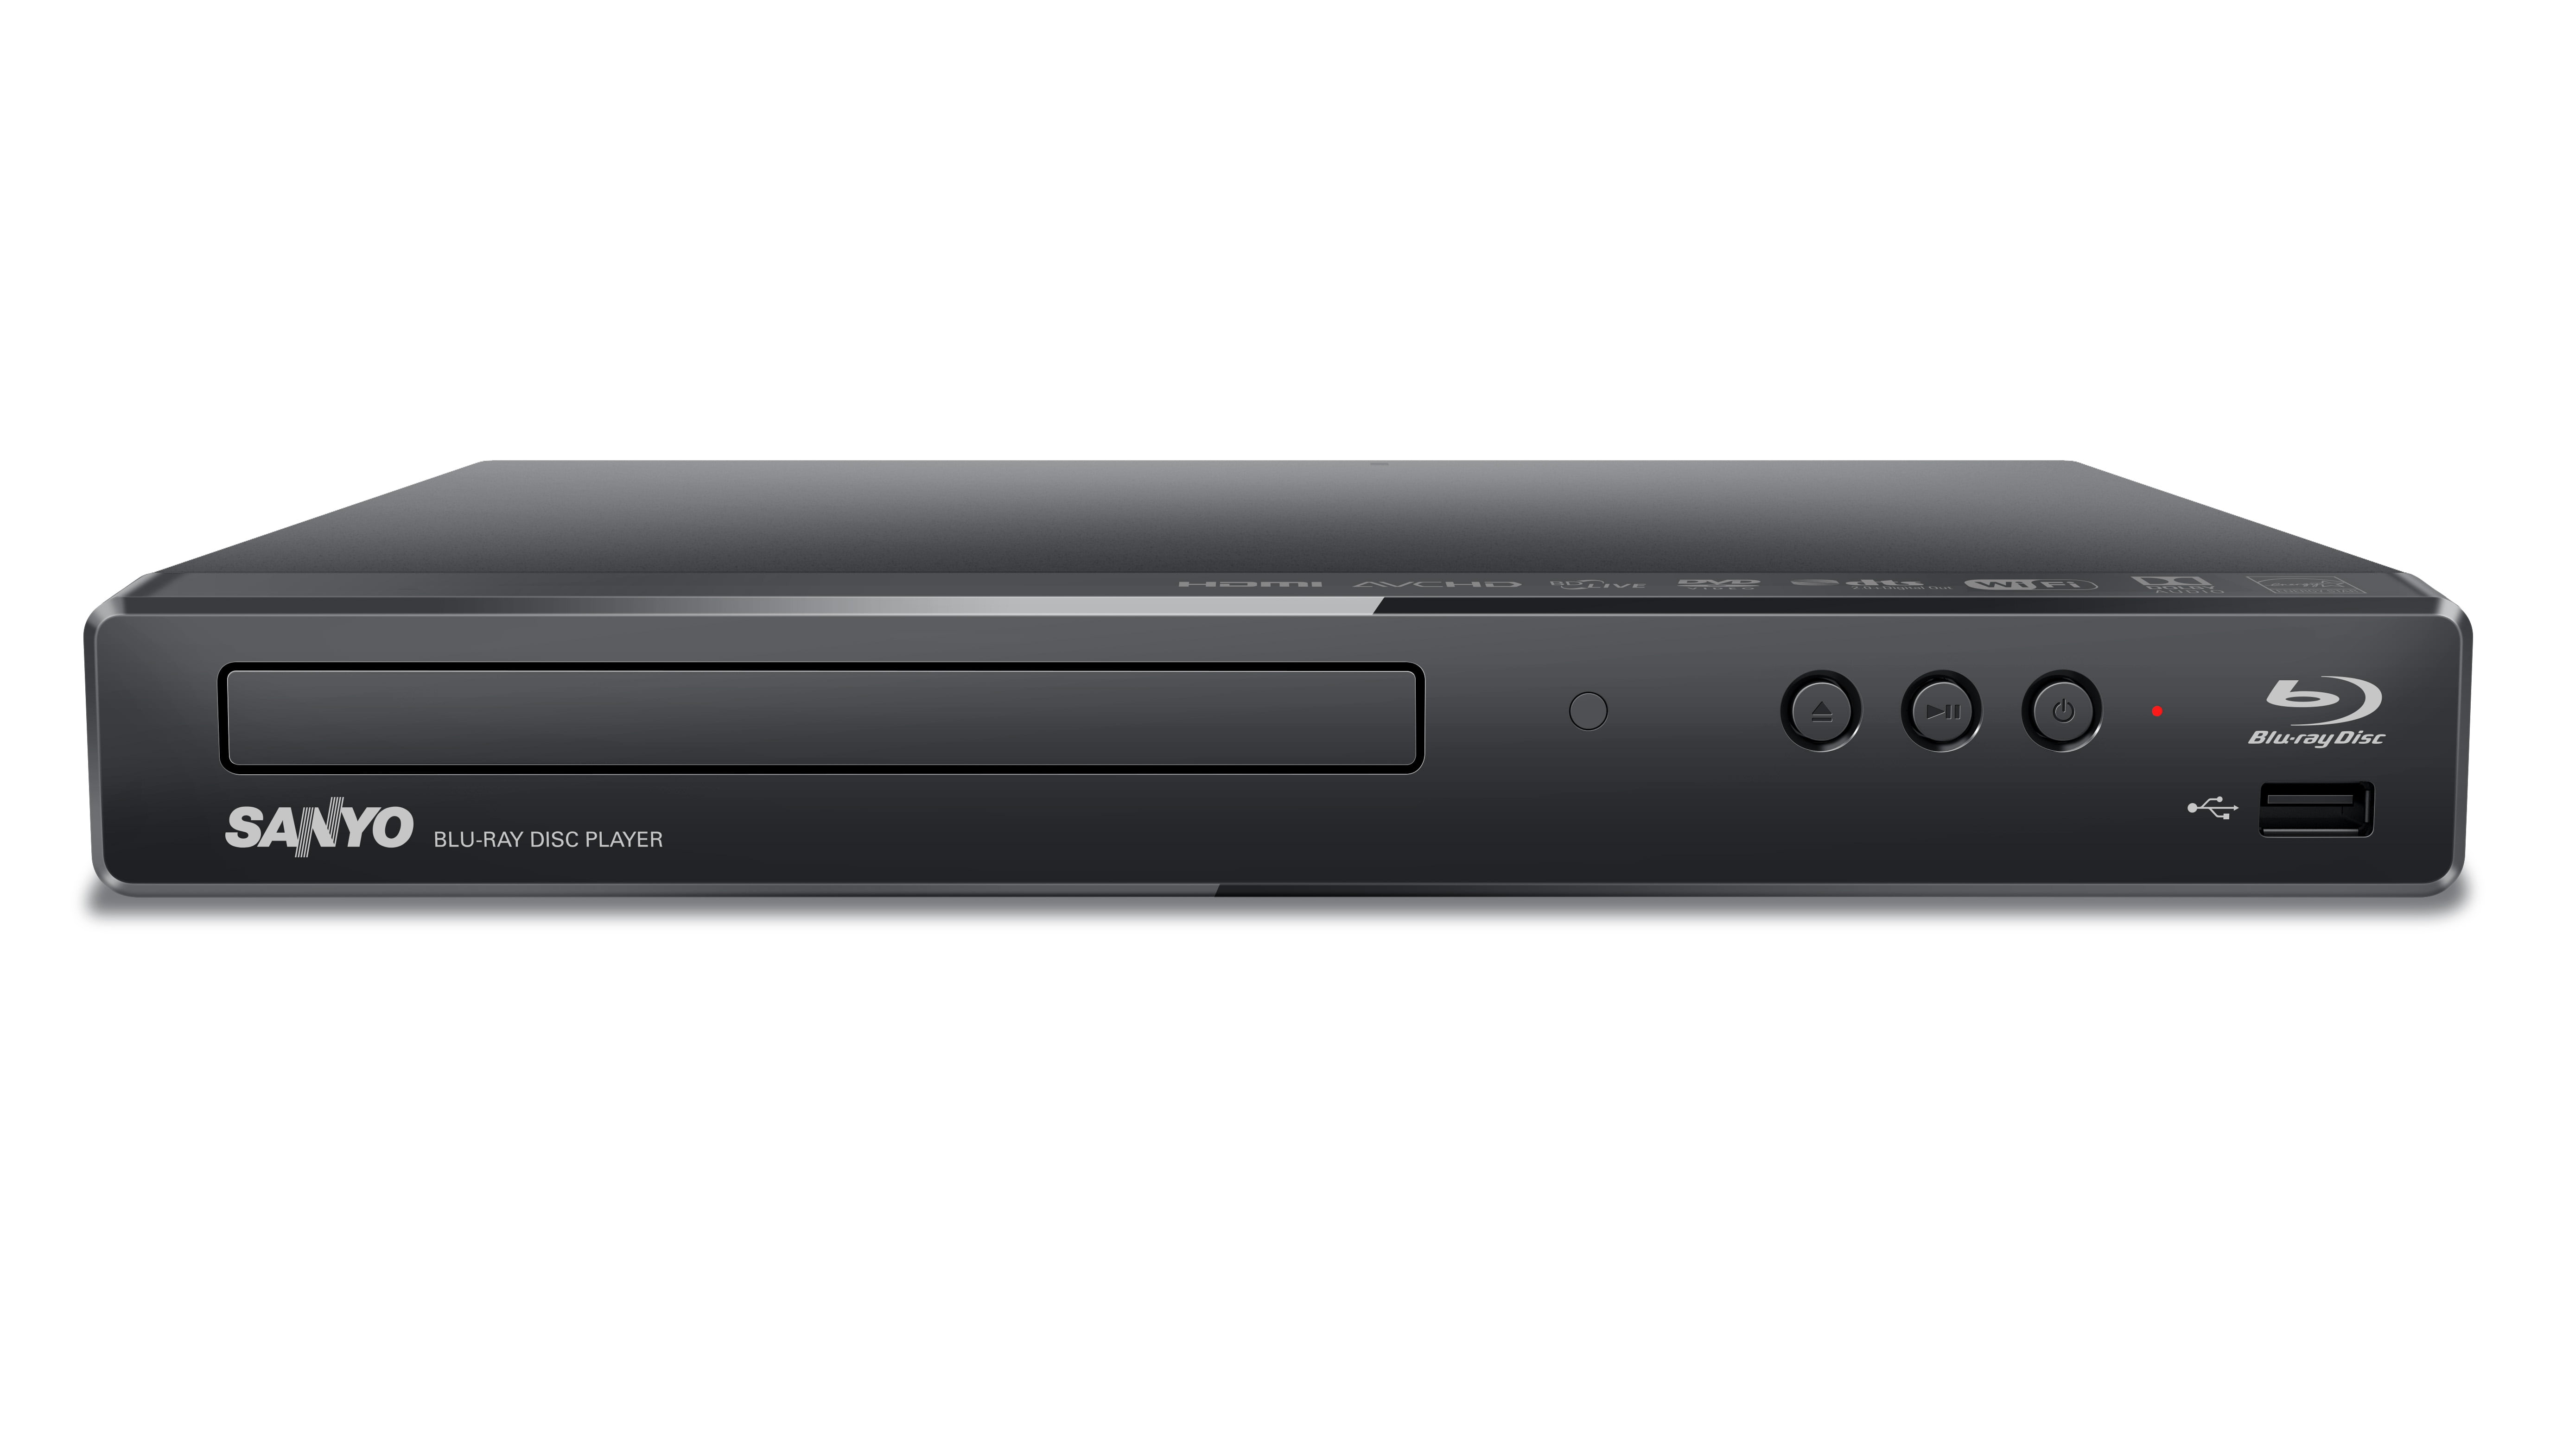 What are the key differences between a Blu-ray player and a DVD player?